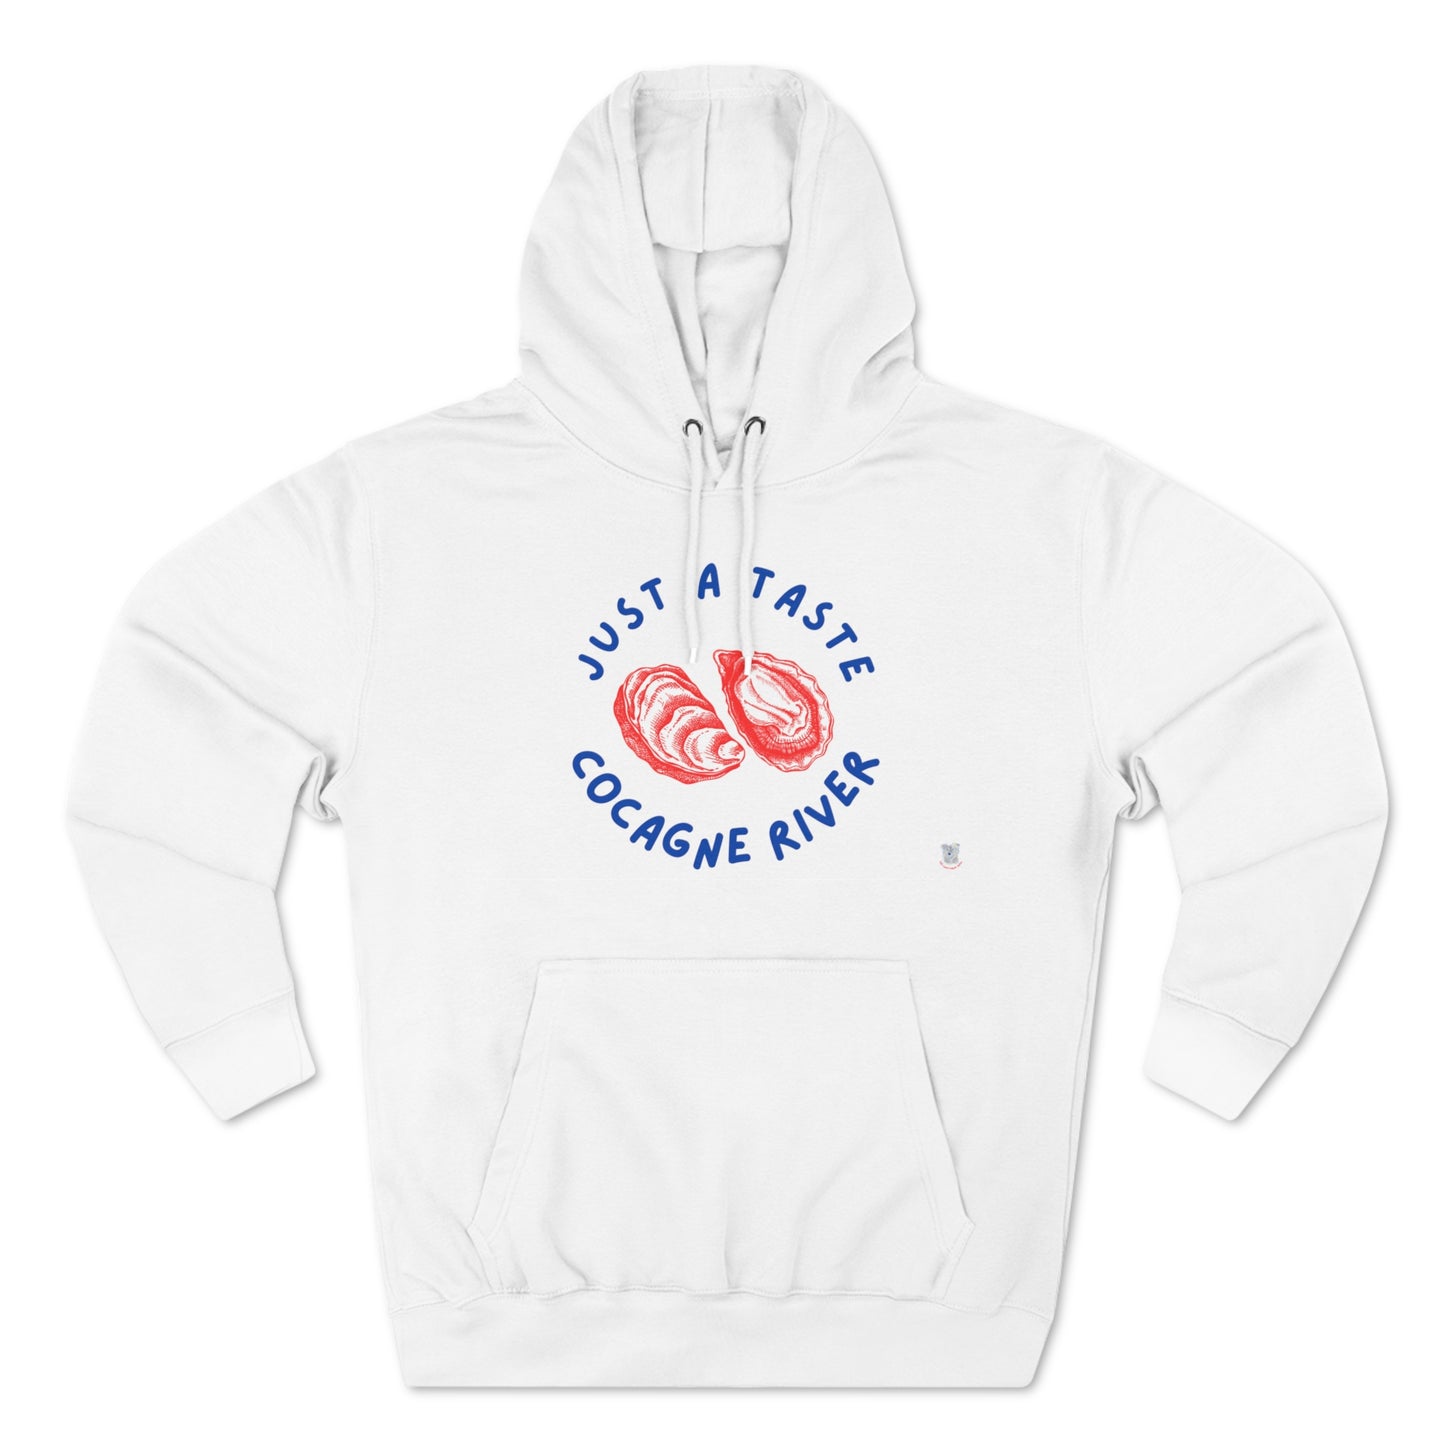 Cocagne River New Brunswick Pullover Hoodie